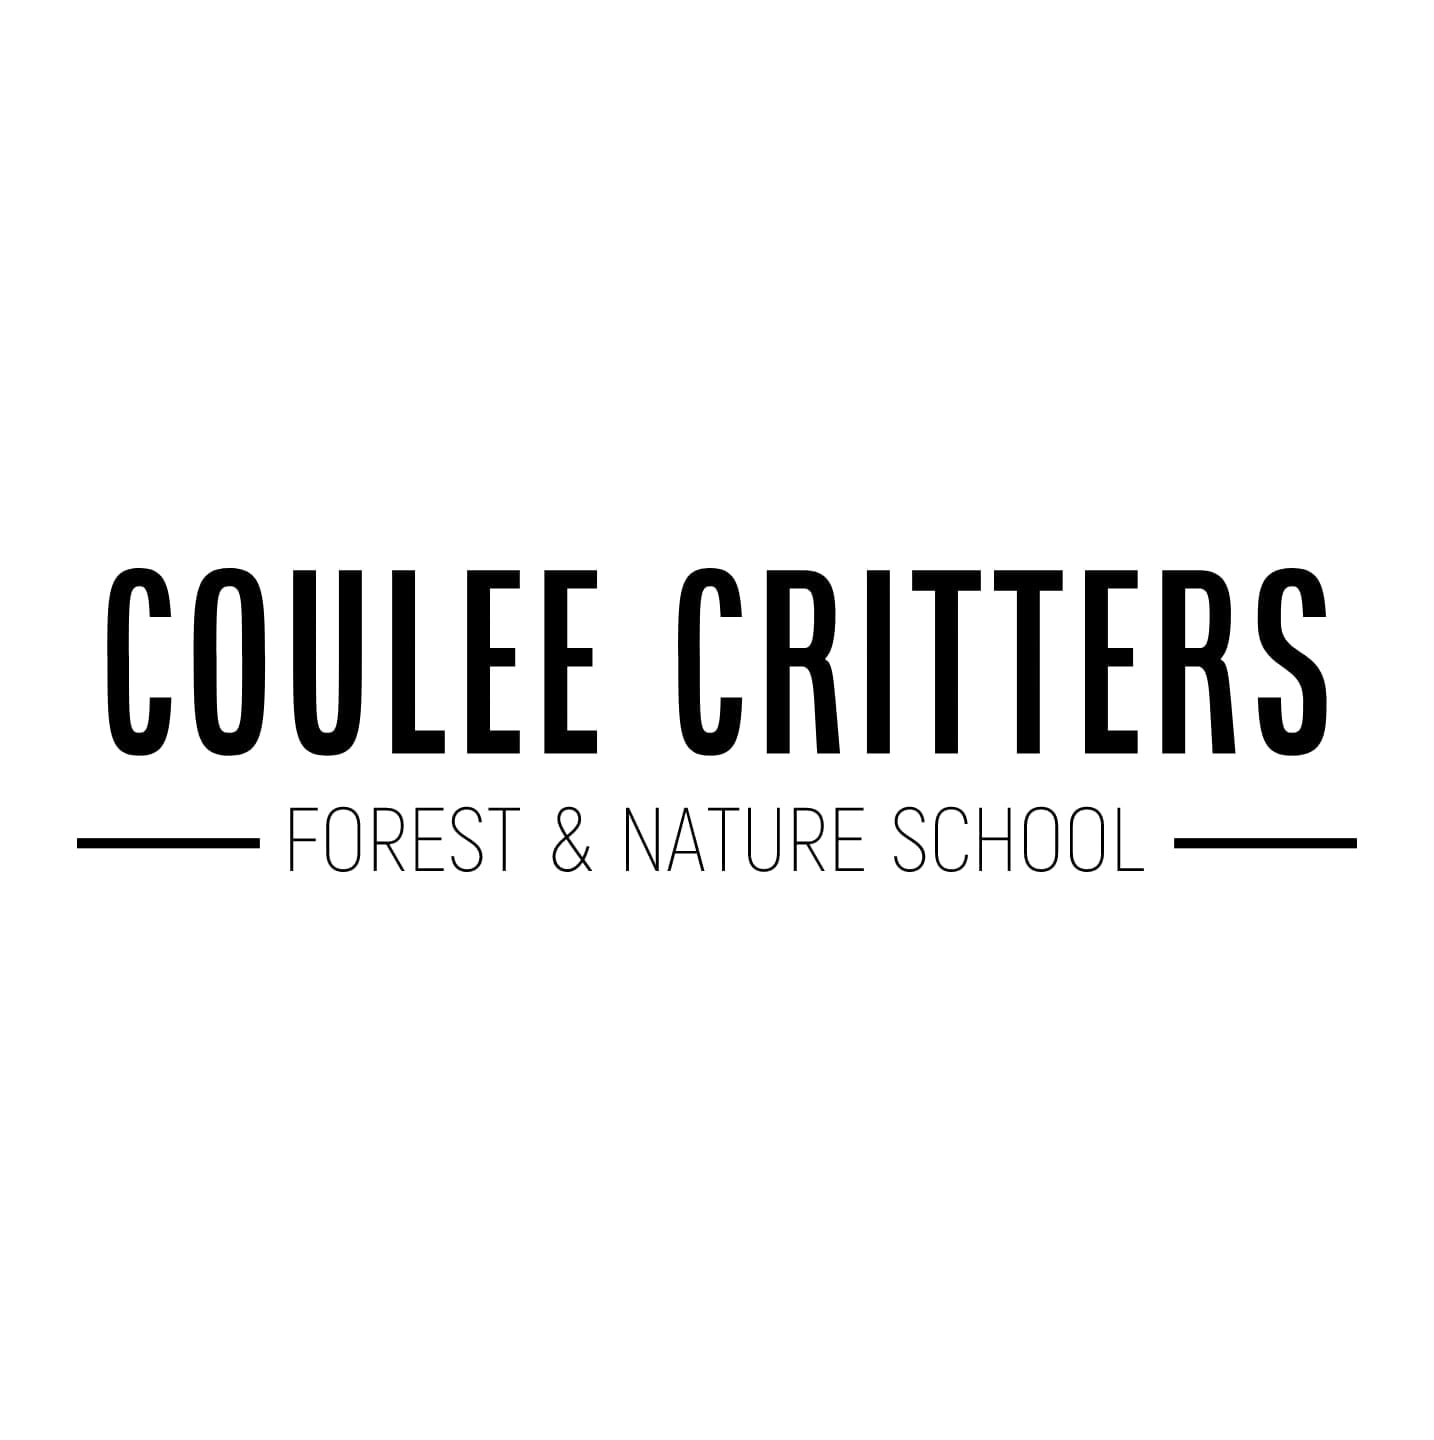 Coulee Critters Forest & Nature School